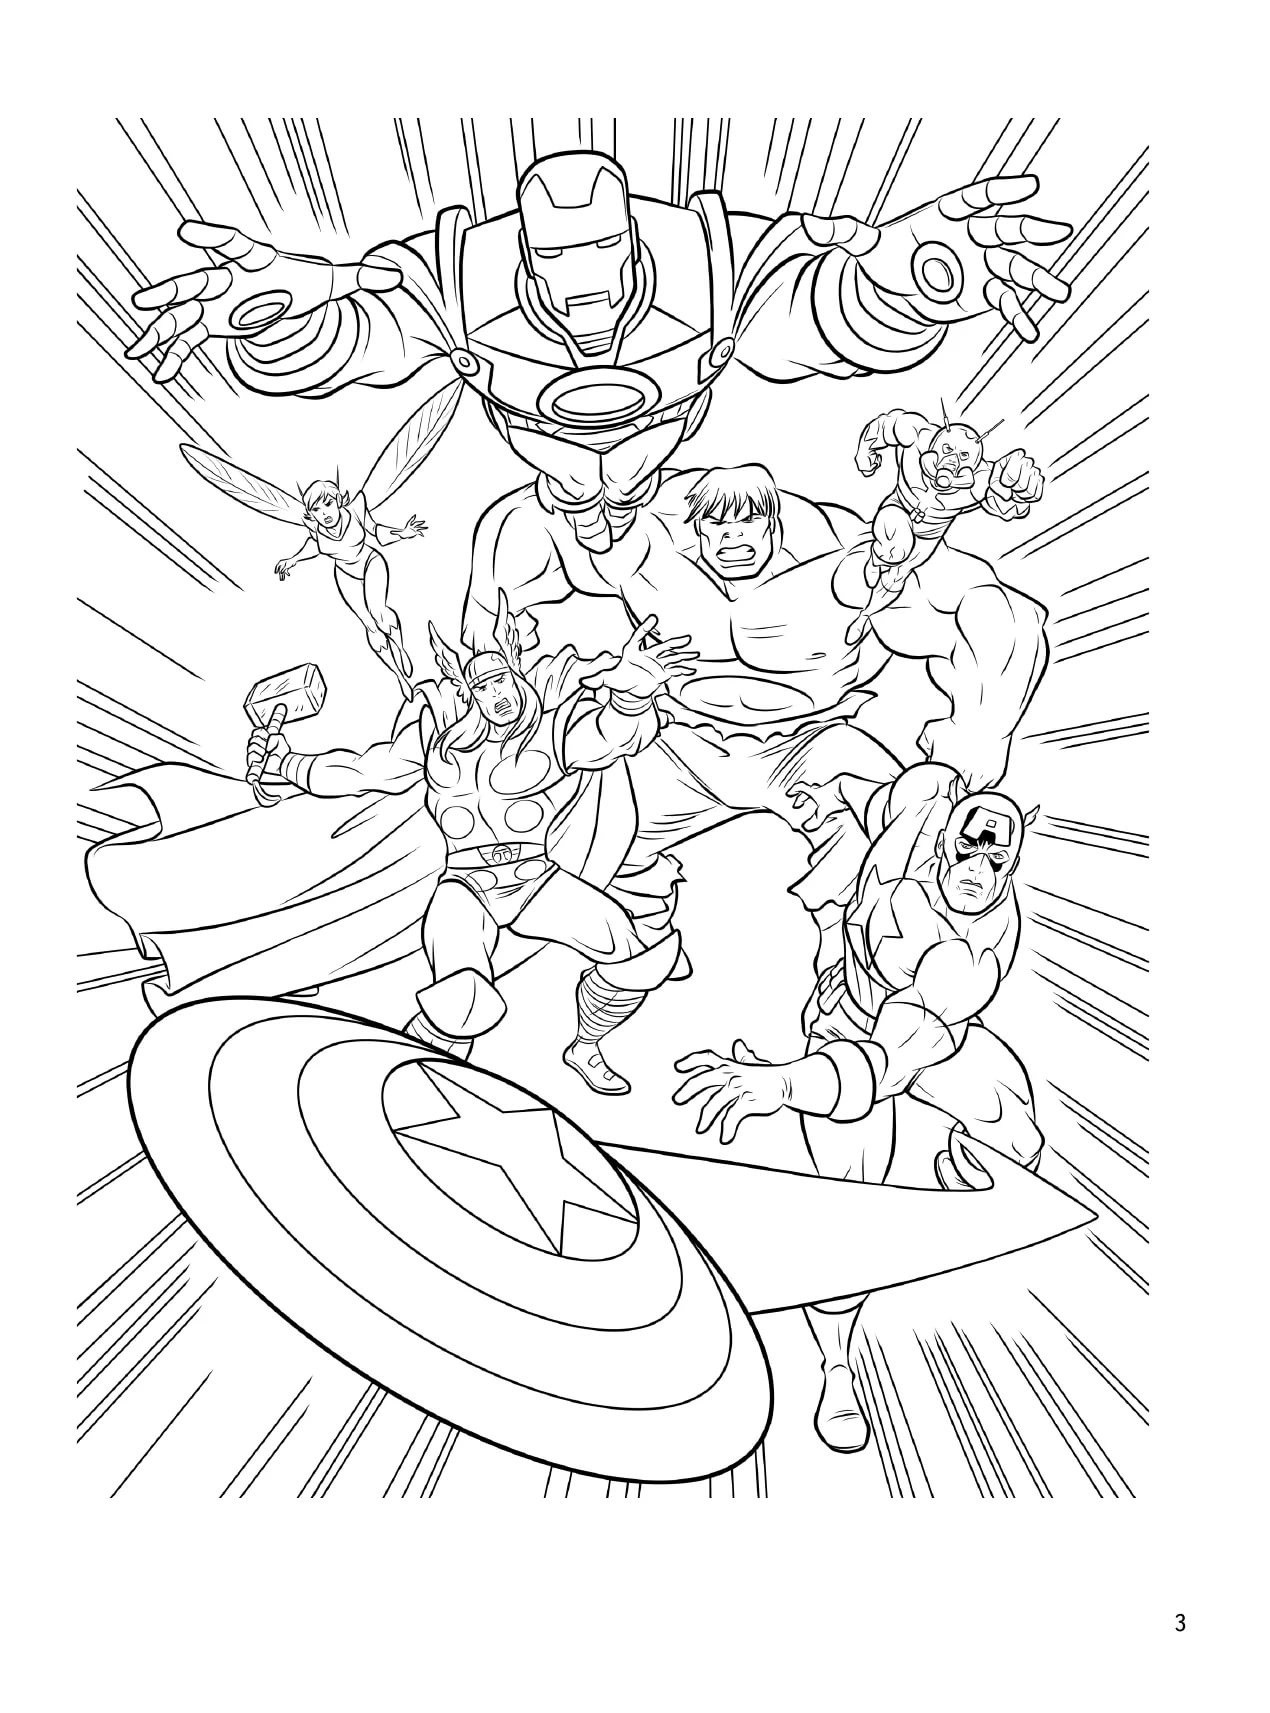 Avengers 04  coloring page to print and coloring